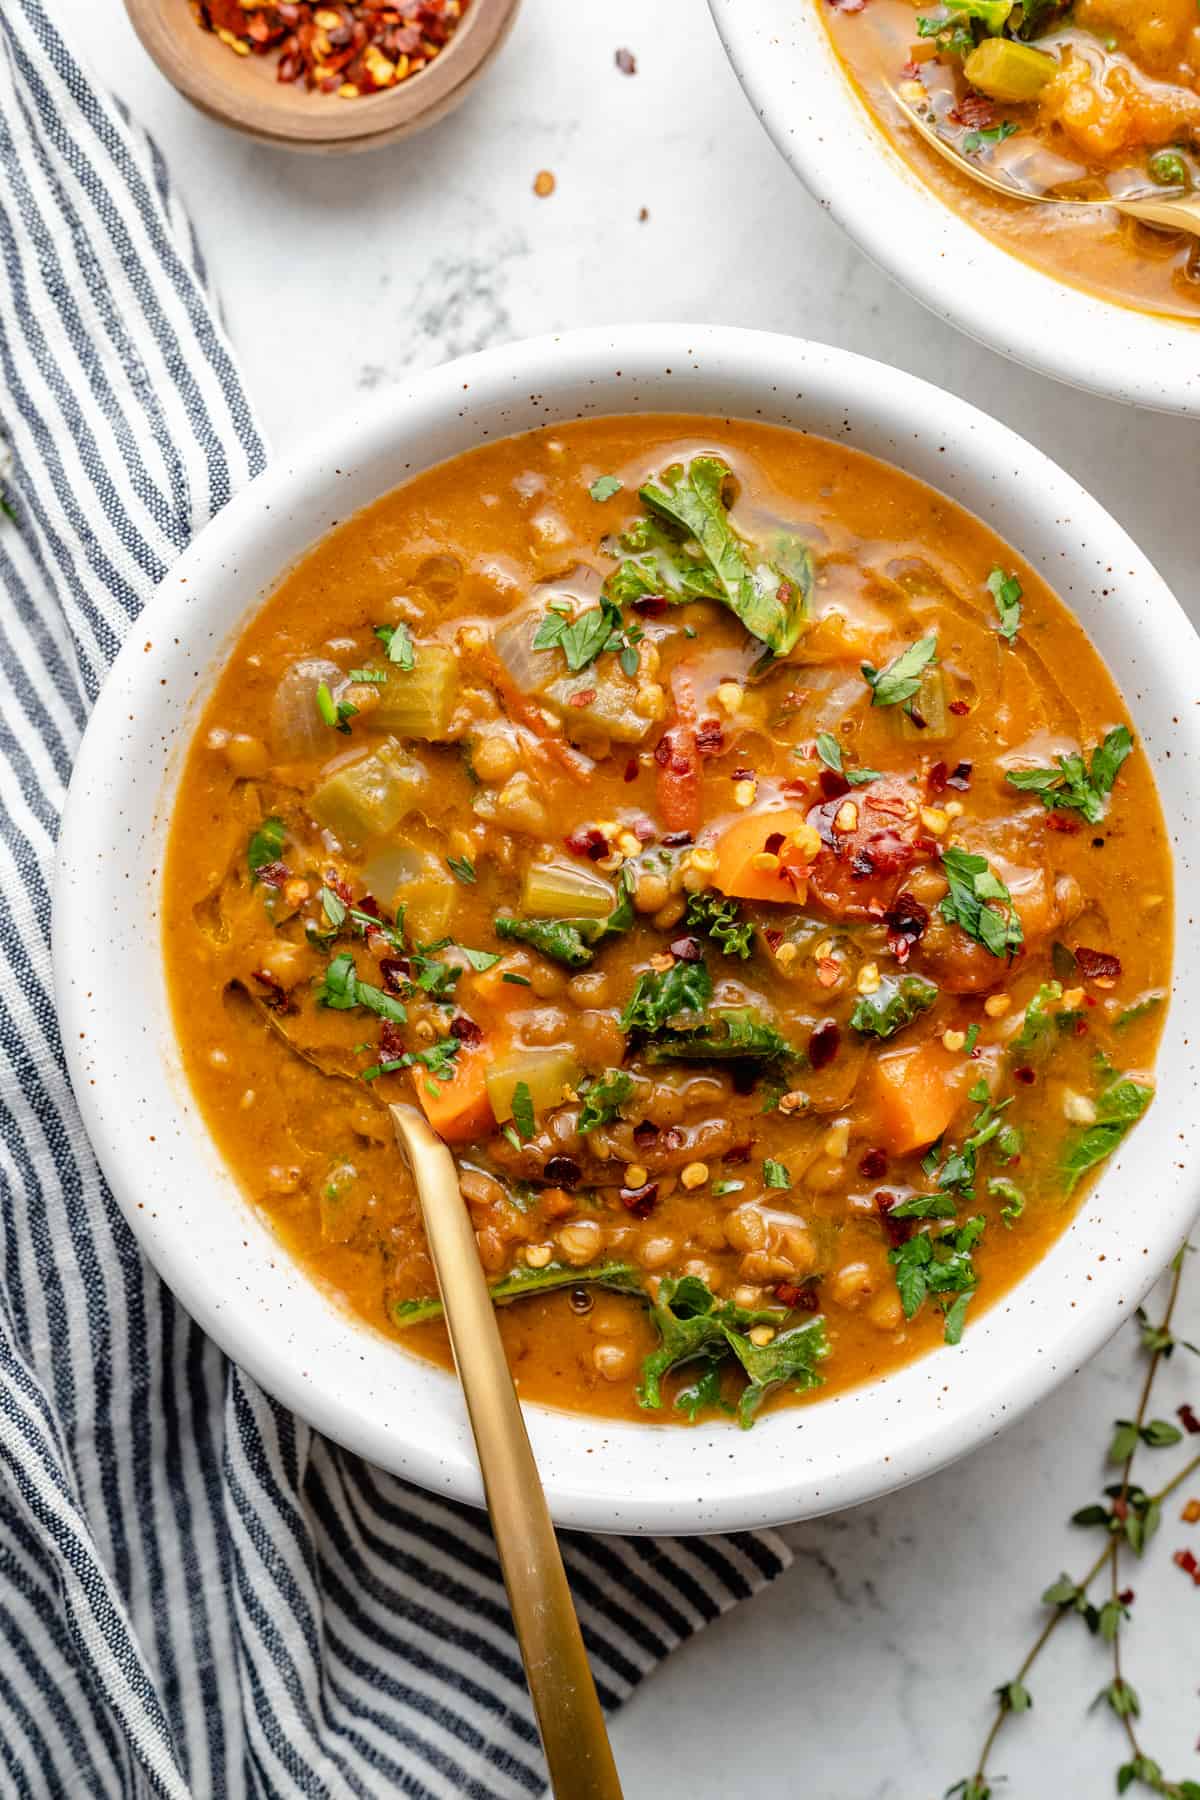 Spicy Indian Soup